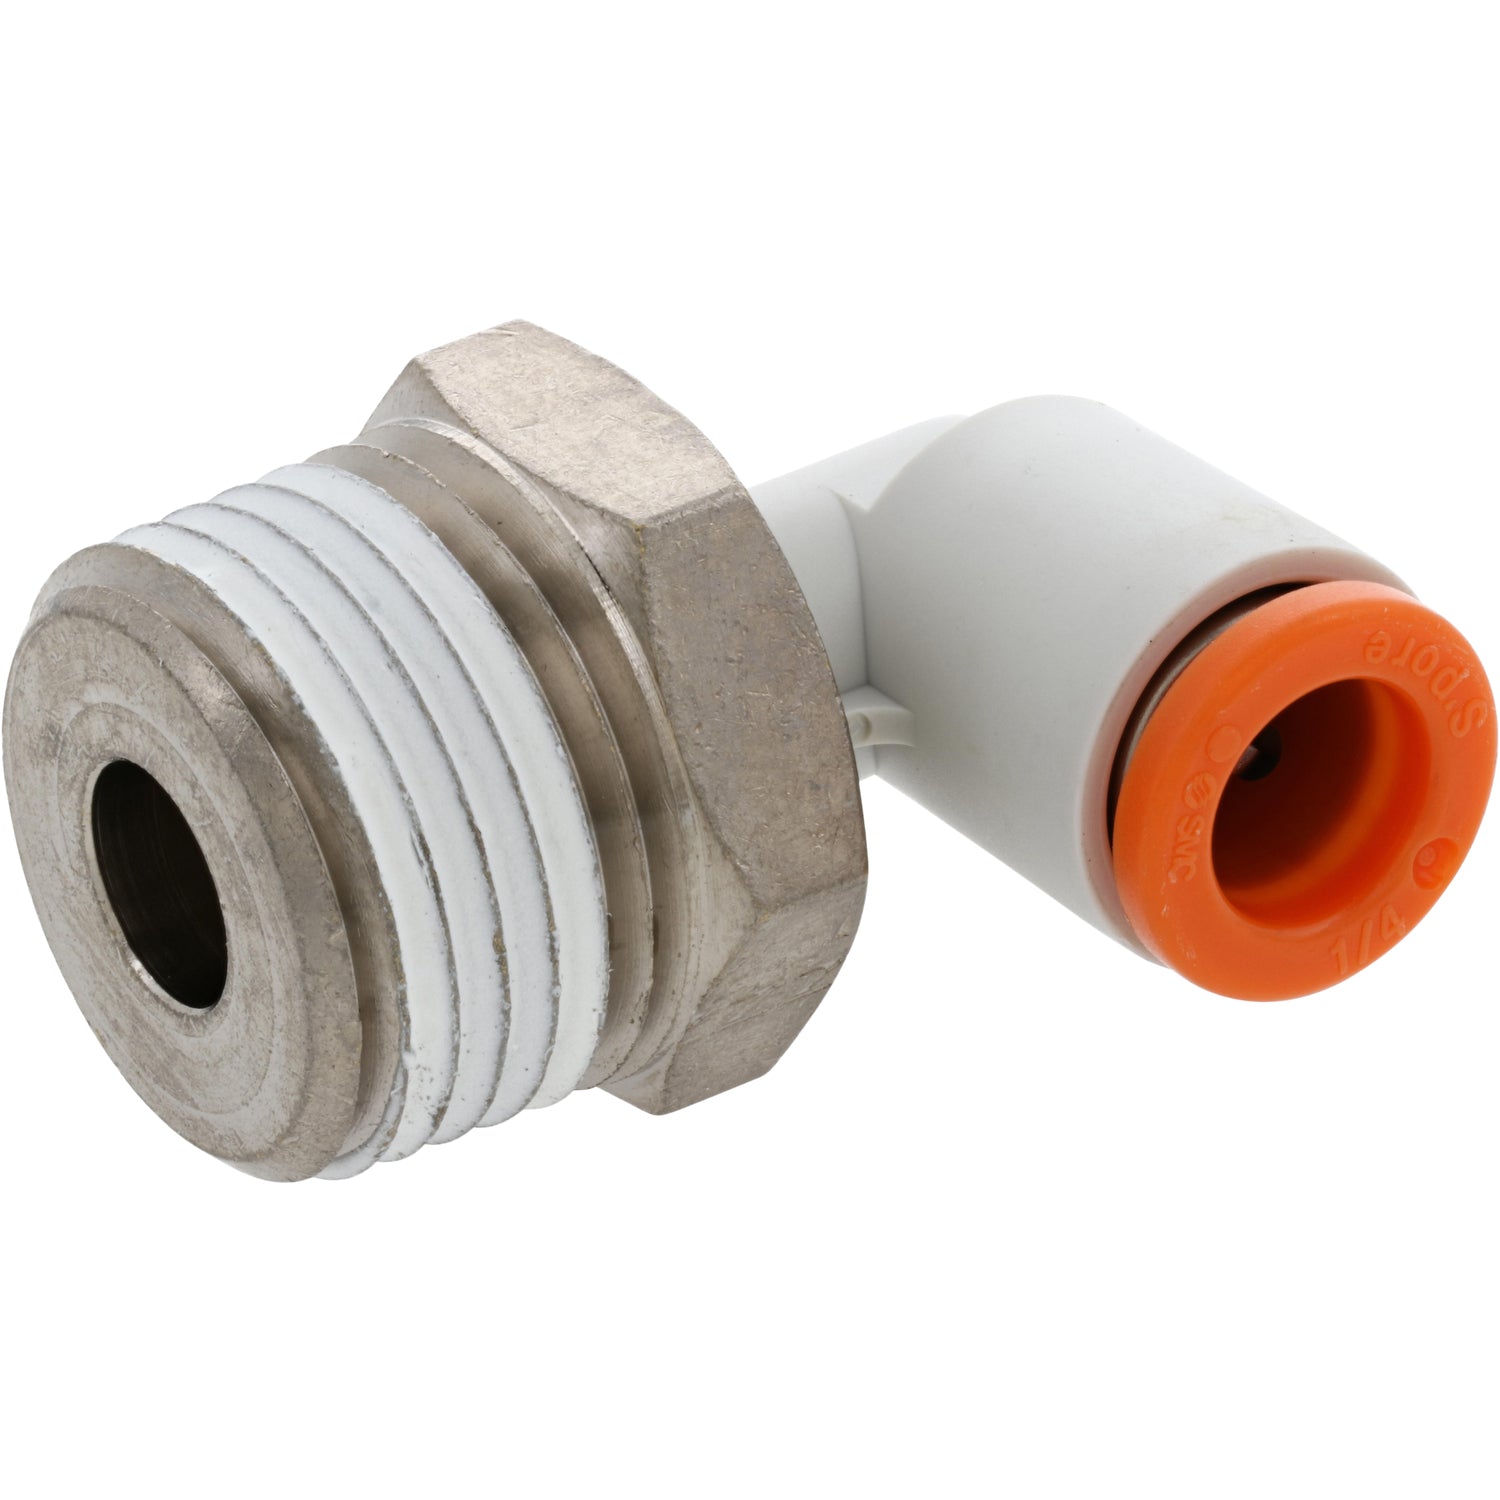 Brass threaded push-in connector with orange collar on white background.